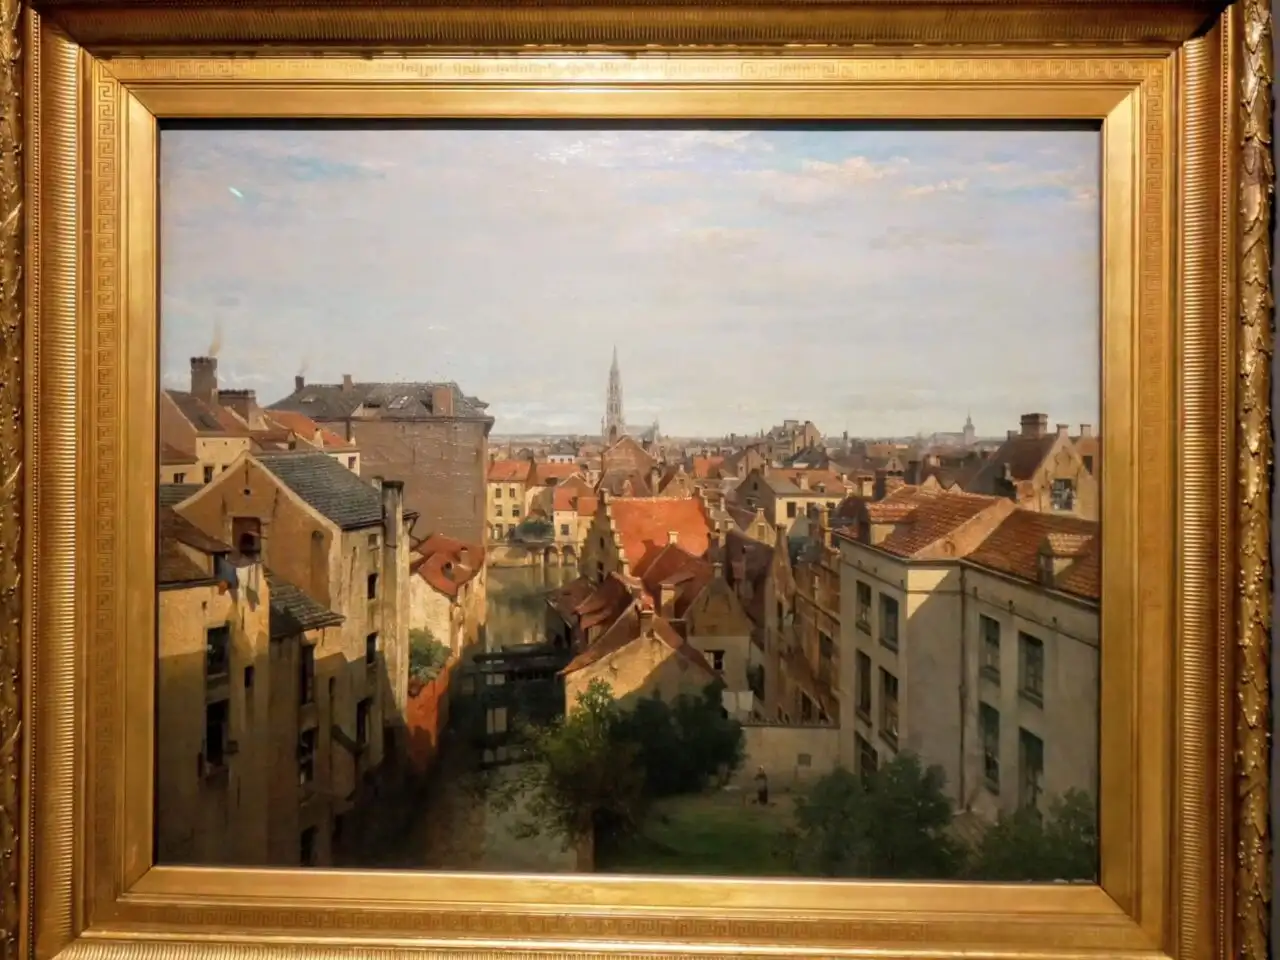 Painting view of Brussels from the Royal Museum of Fine Arts of Belgium in Brussels